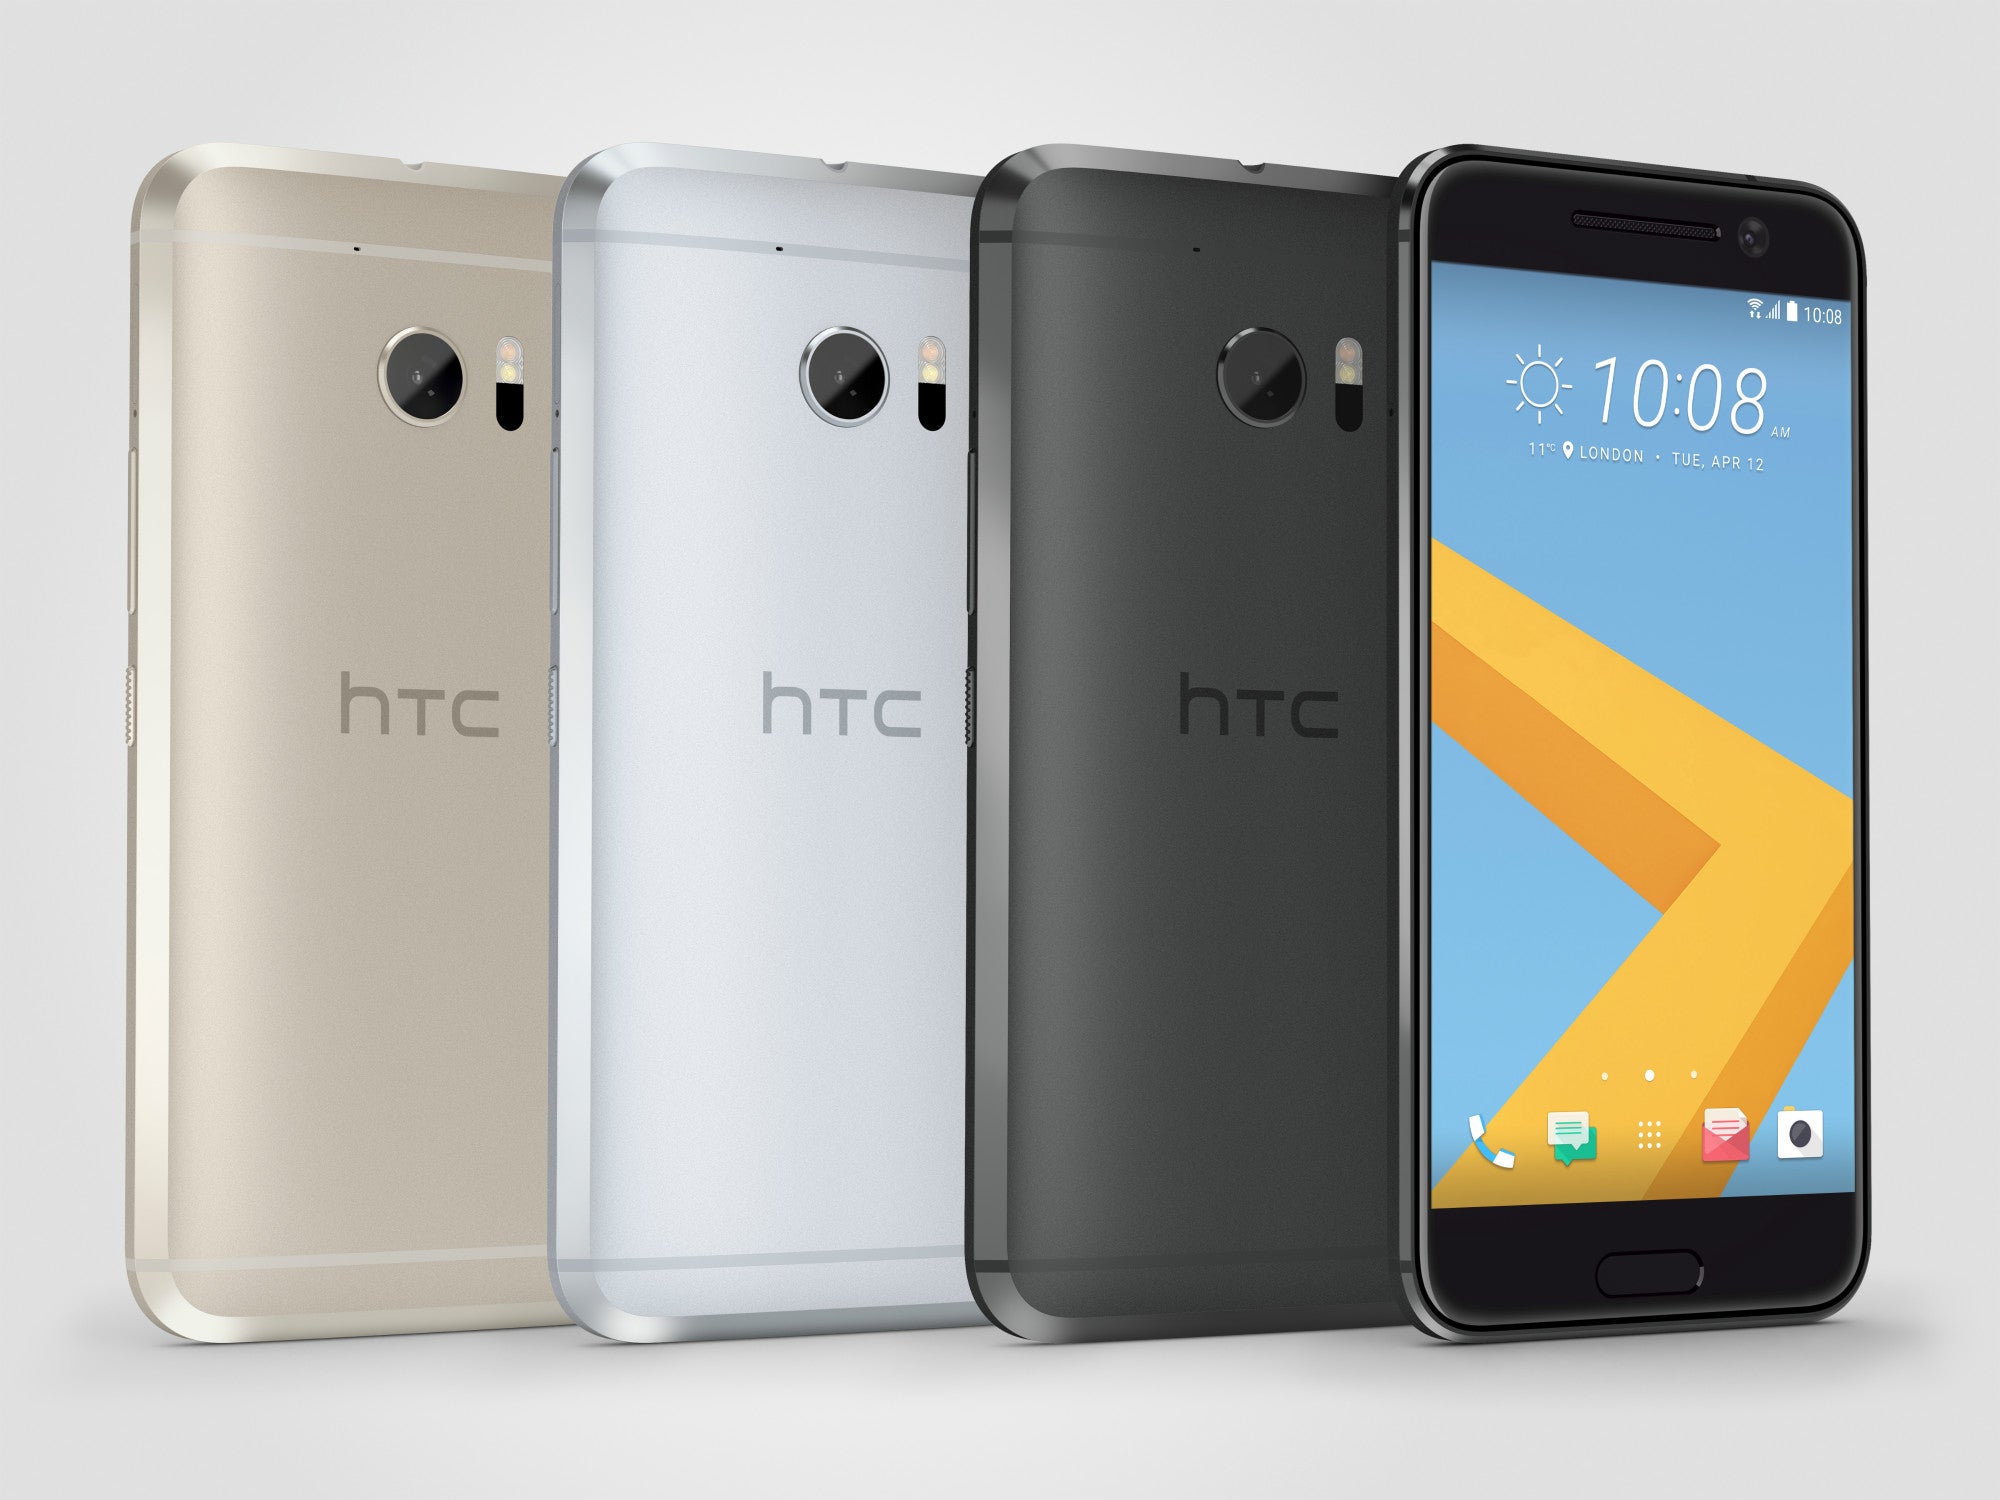 Join Team HTC and score the HTC 10 for as little as $499 until November 14